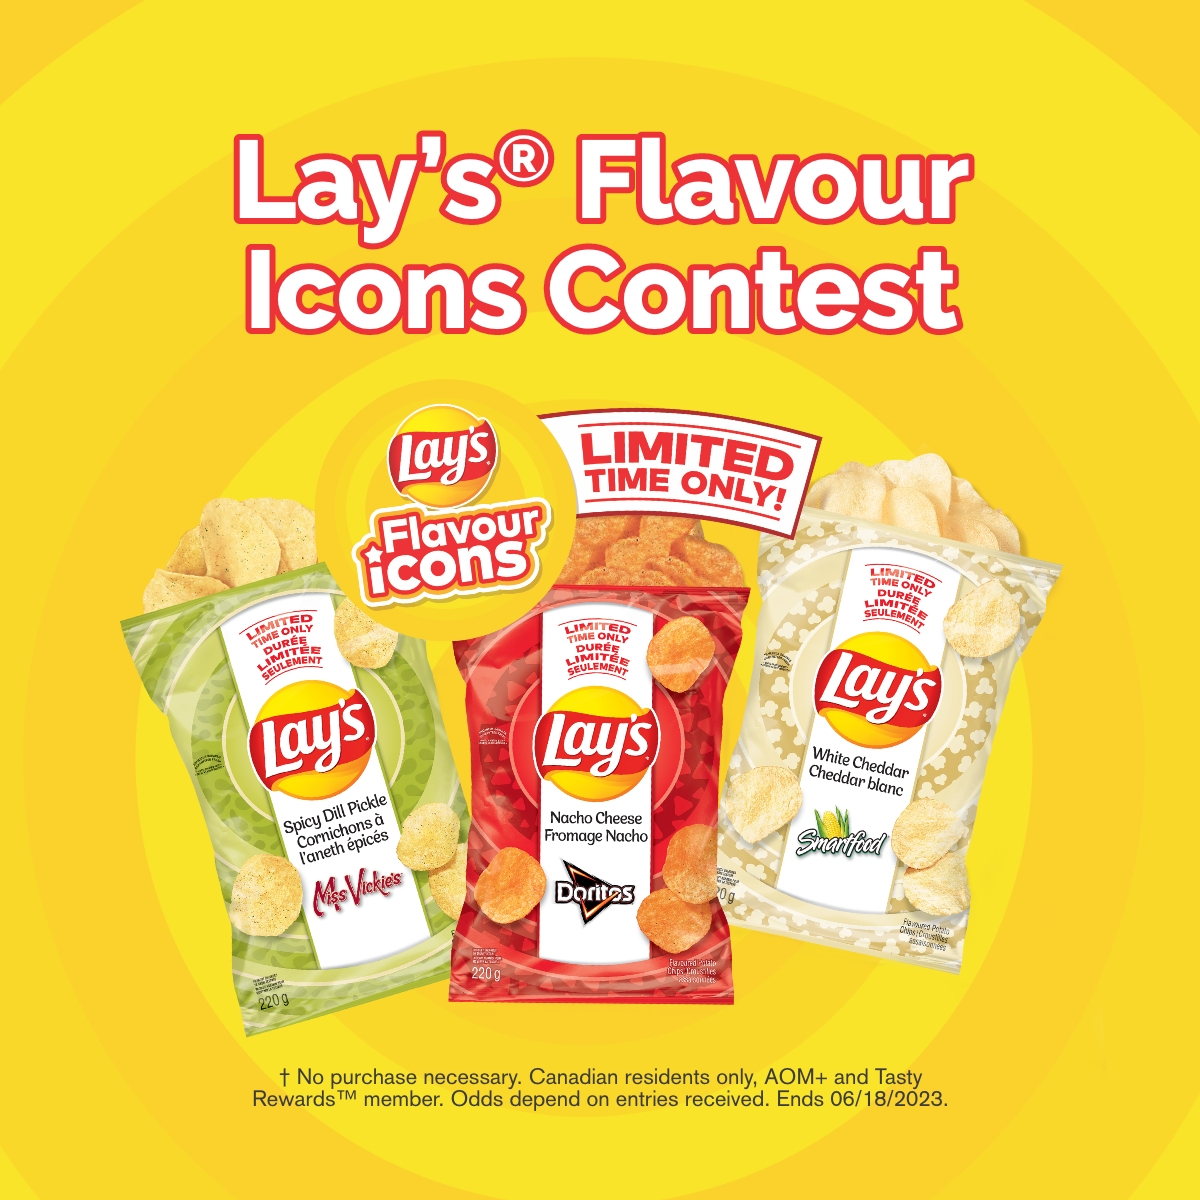 Lay’s<sup>®</sup> Flavour Icons Contest